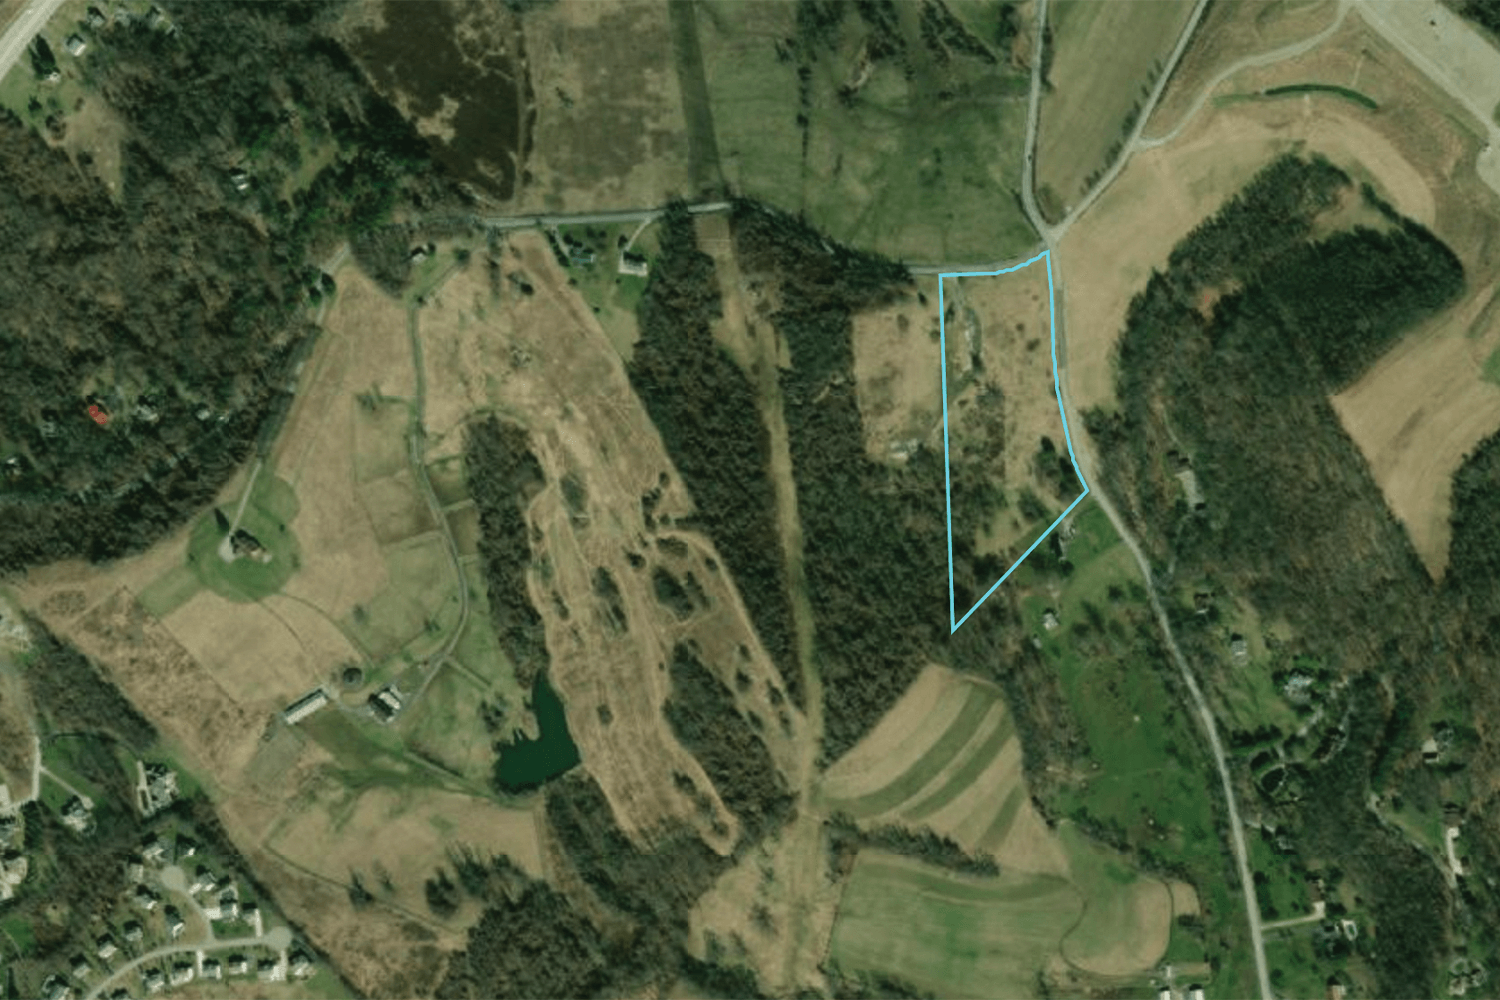 Aerial view of 550 Munce Ridge Road with an outline of property lines